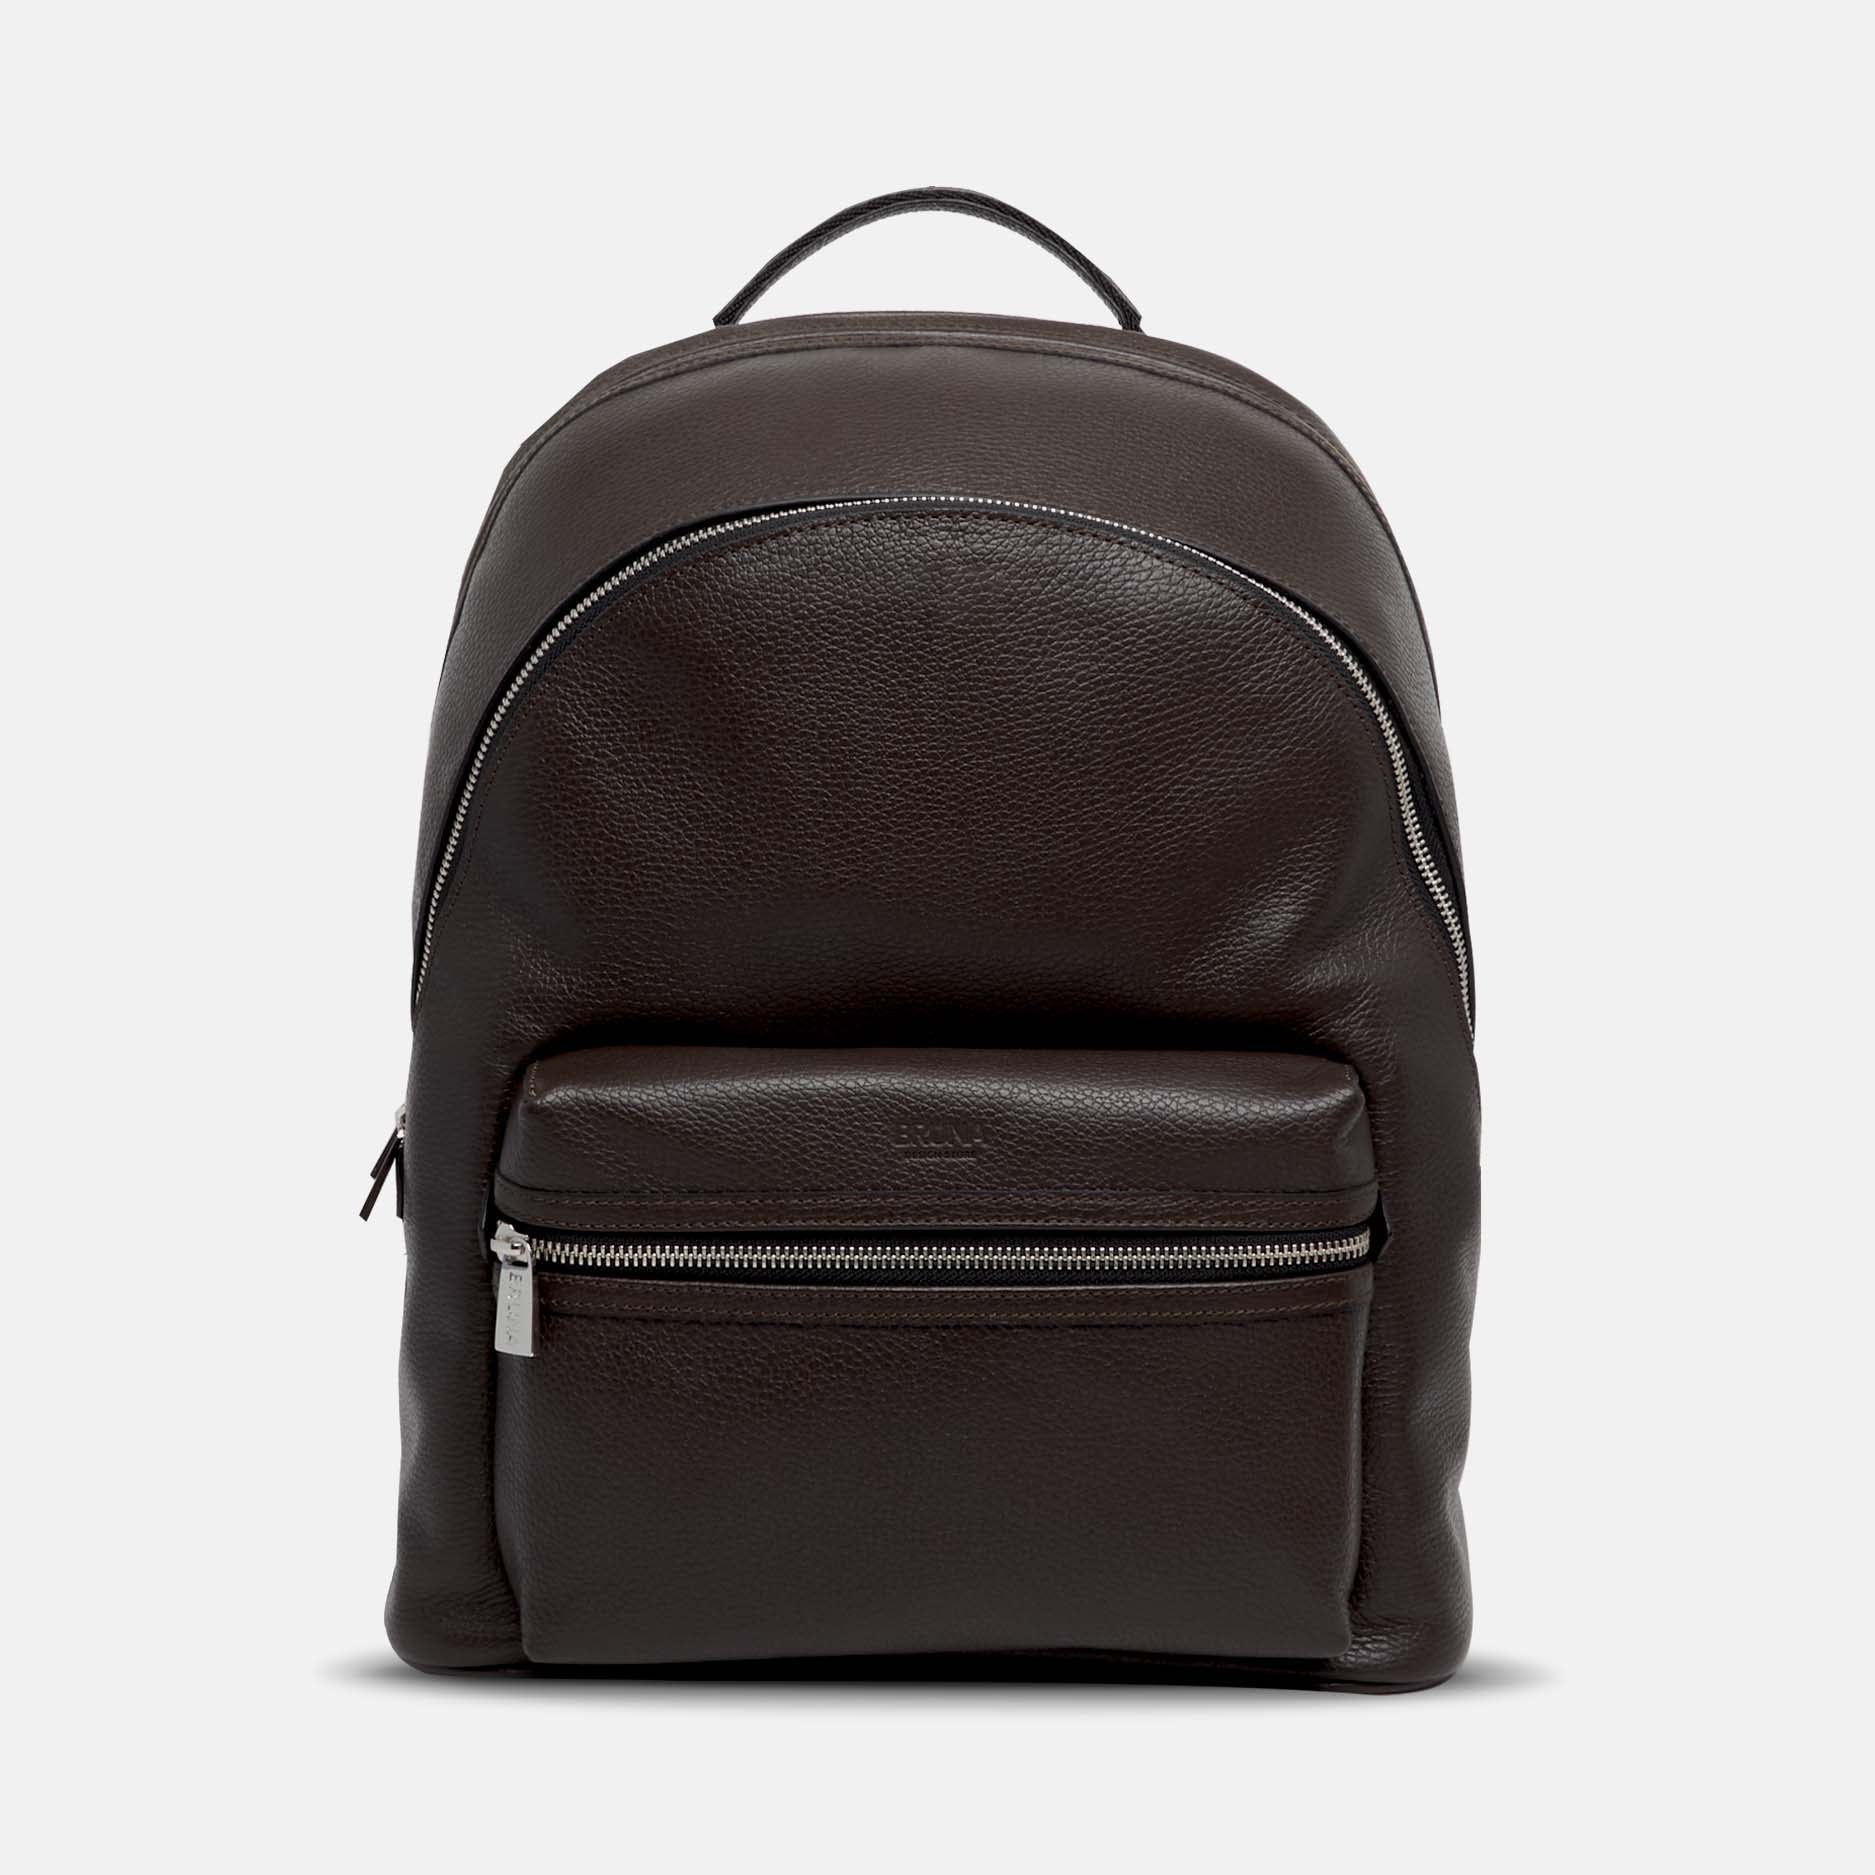 The Backpack - Espresso